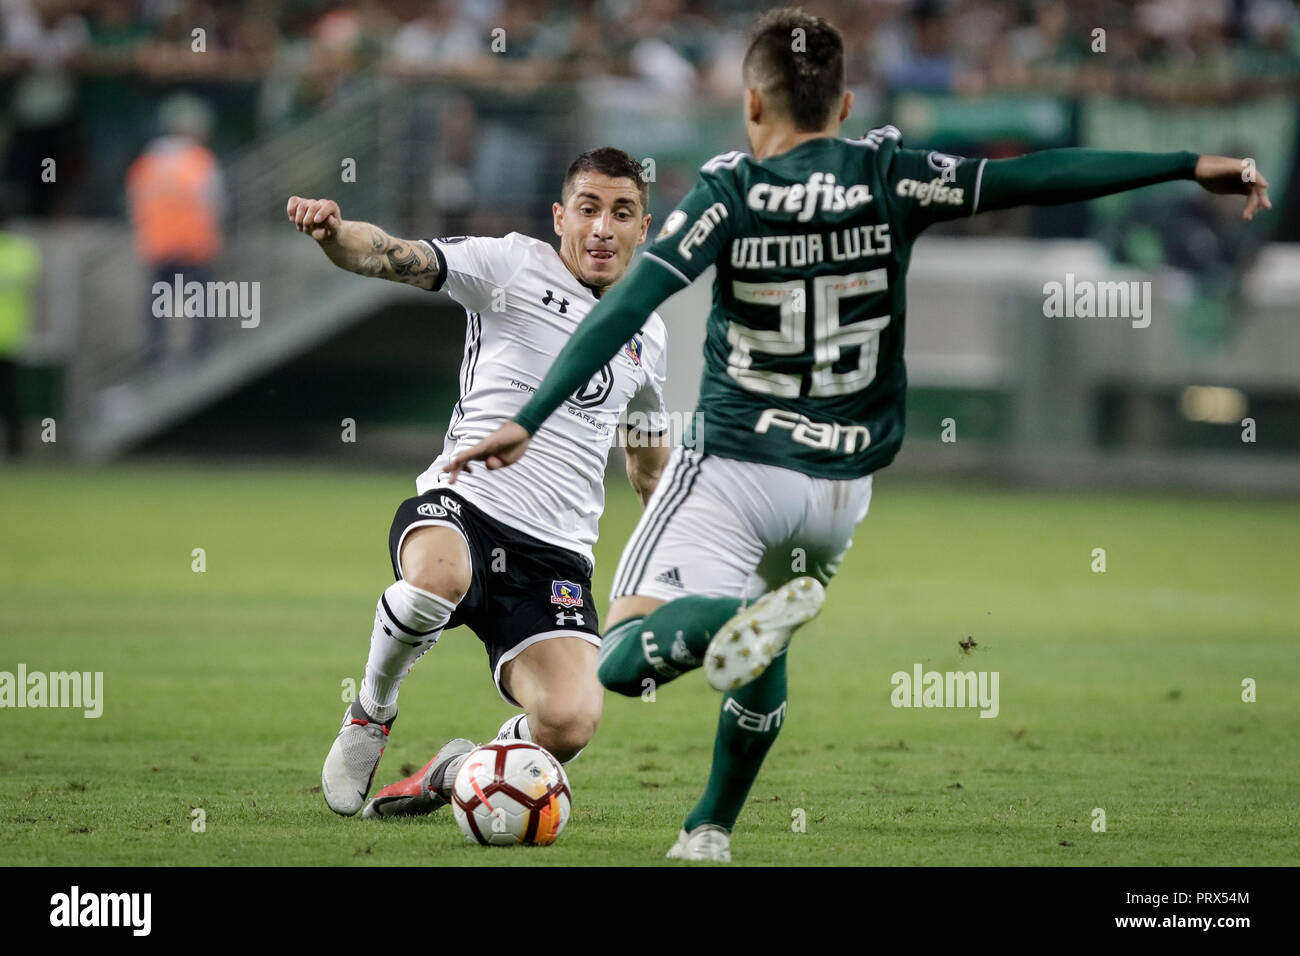 Sao Paulo, Brazil. 03rd Oct, 2018. Carlos Carmona and Victor Luis during the match between Palmeiras vs. Colo-Colo (CHI), validated by the Copa Libertadores 2018, at the Allianz Parque stadium in Sao Paulo. Palmeiras win 2-0. Credit: Thiago Bernardes/Pacific Press/Alamy Live News Stock Photo